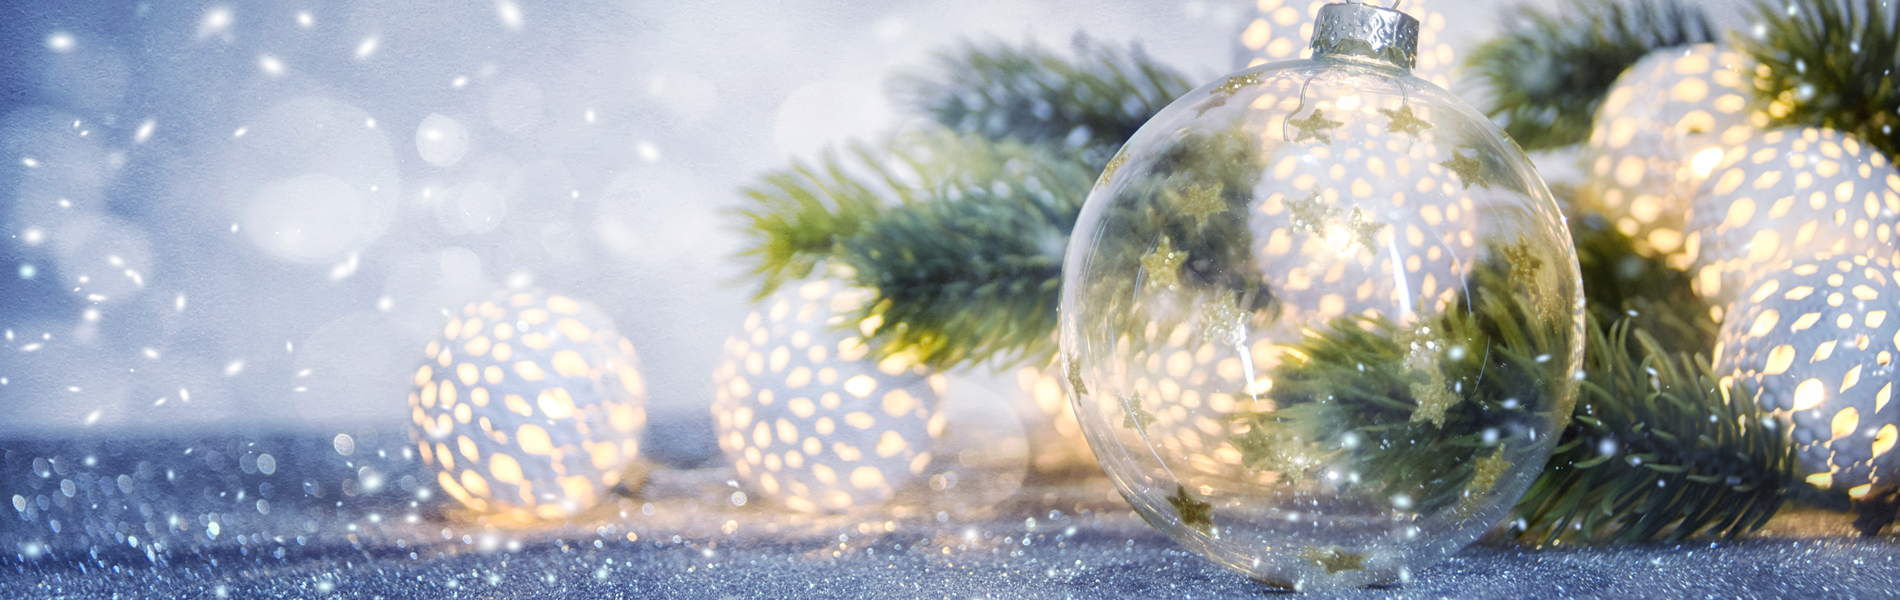 Clear Christmas ornaments amongst evergreen and christmas lights